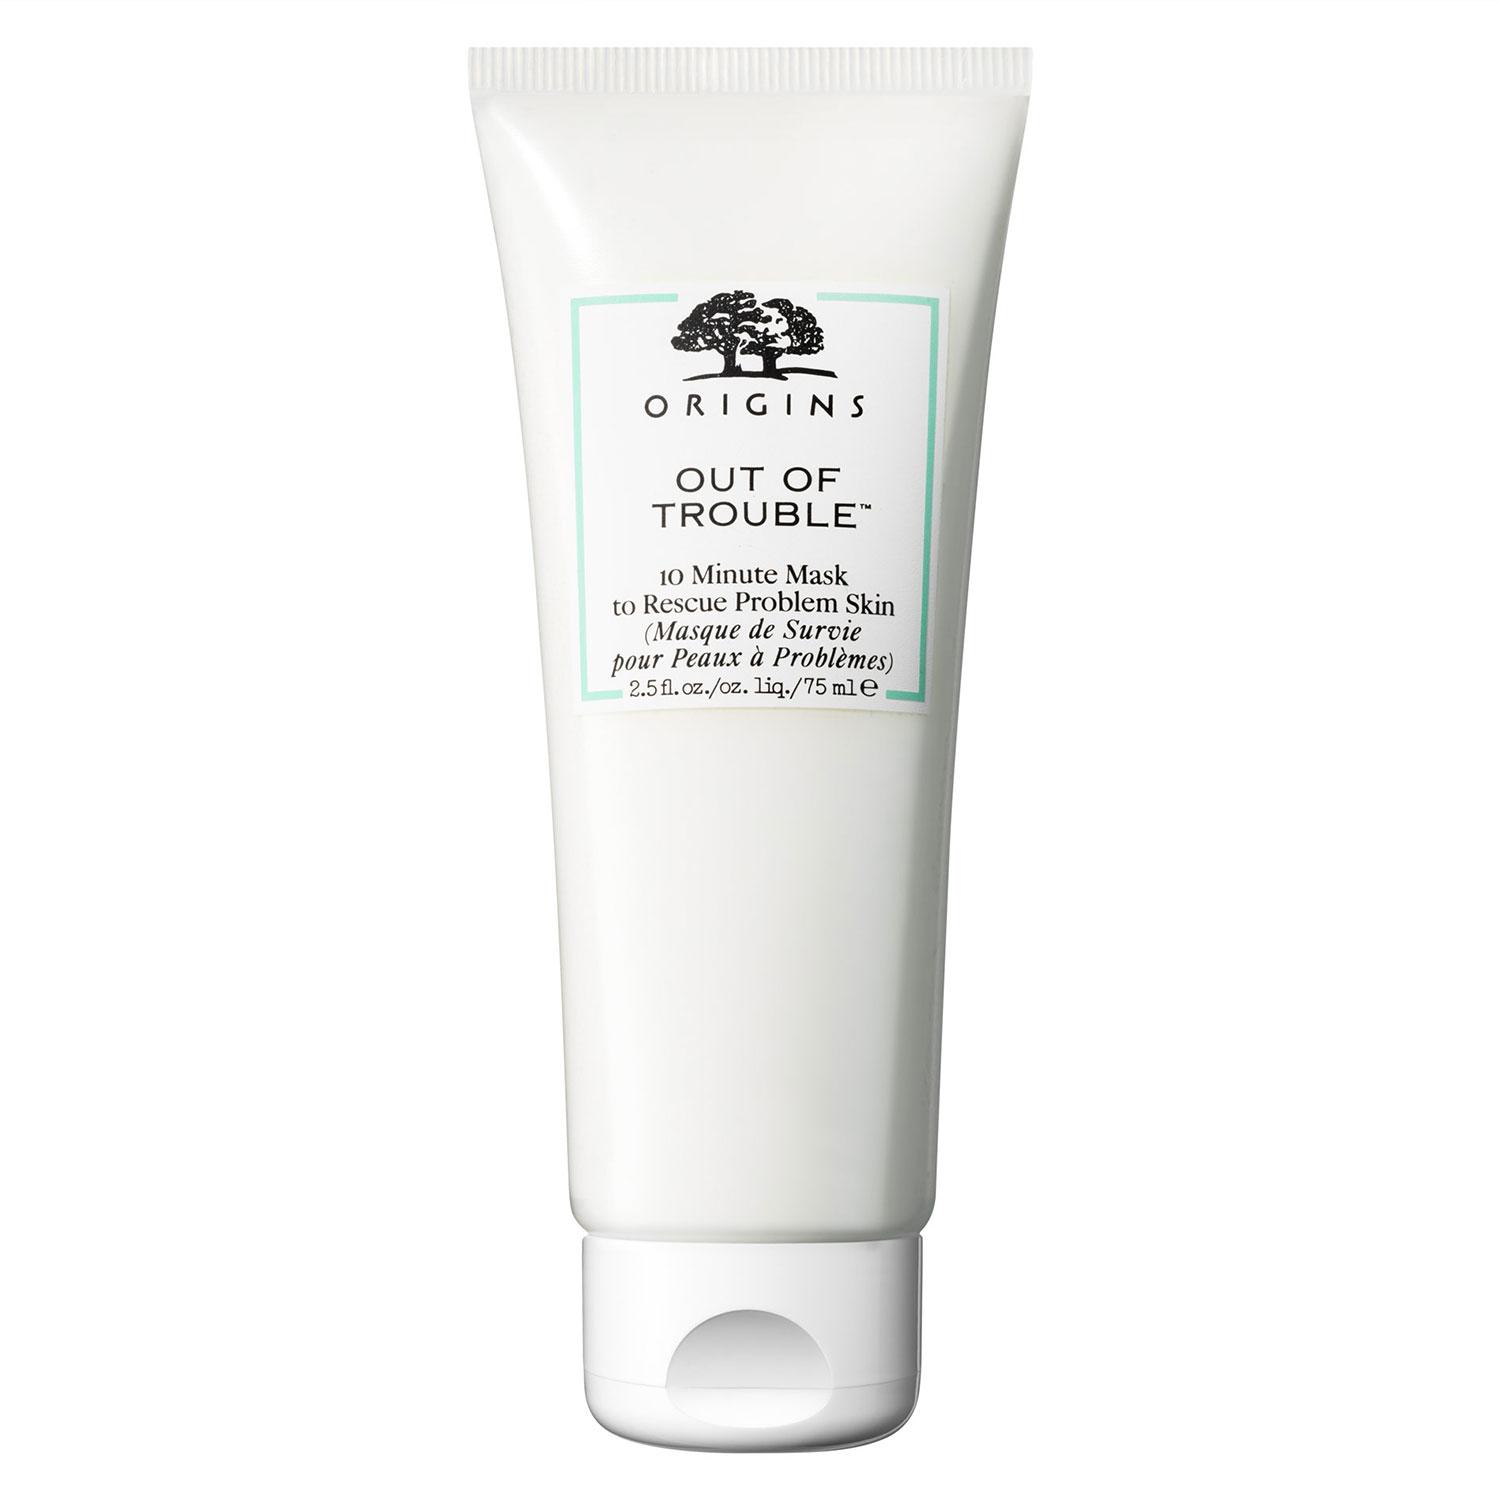 Origins Out of Trouble - 10 Min Mask to Rescue Problem Skin